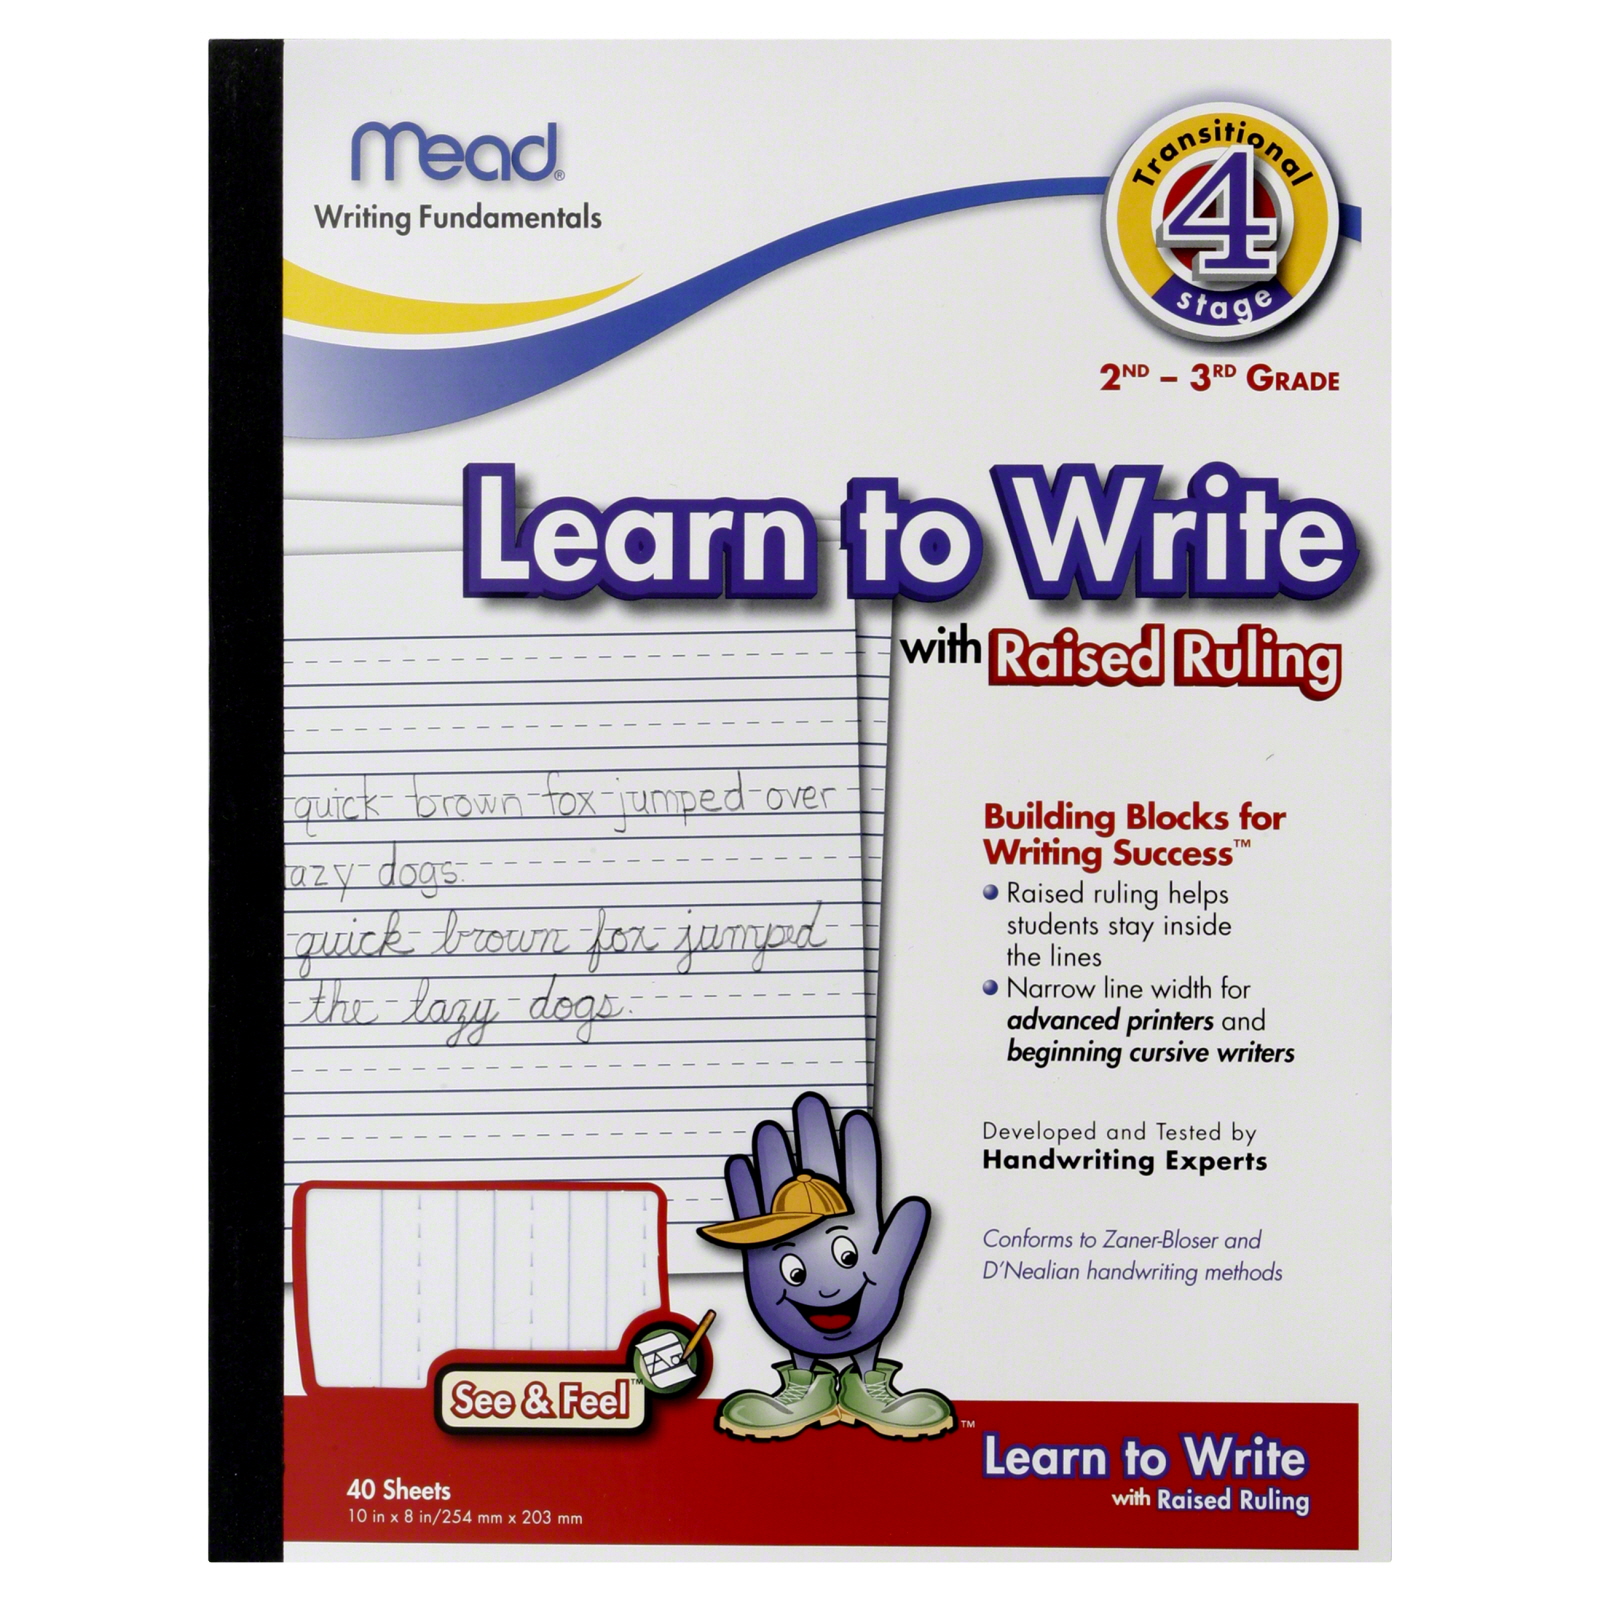 Business writing fundamentals by mead